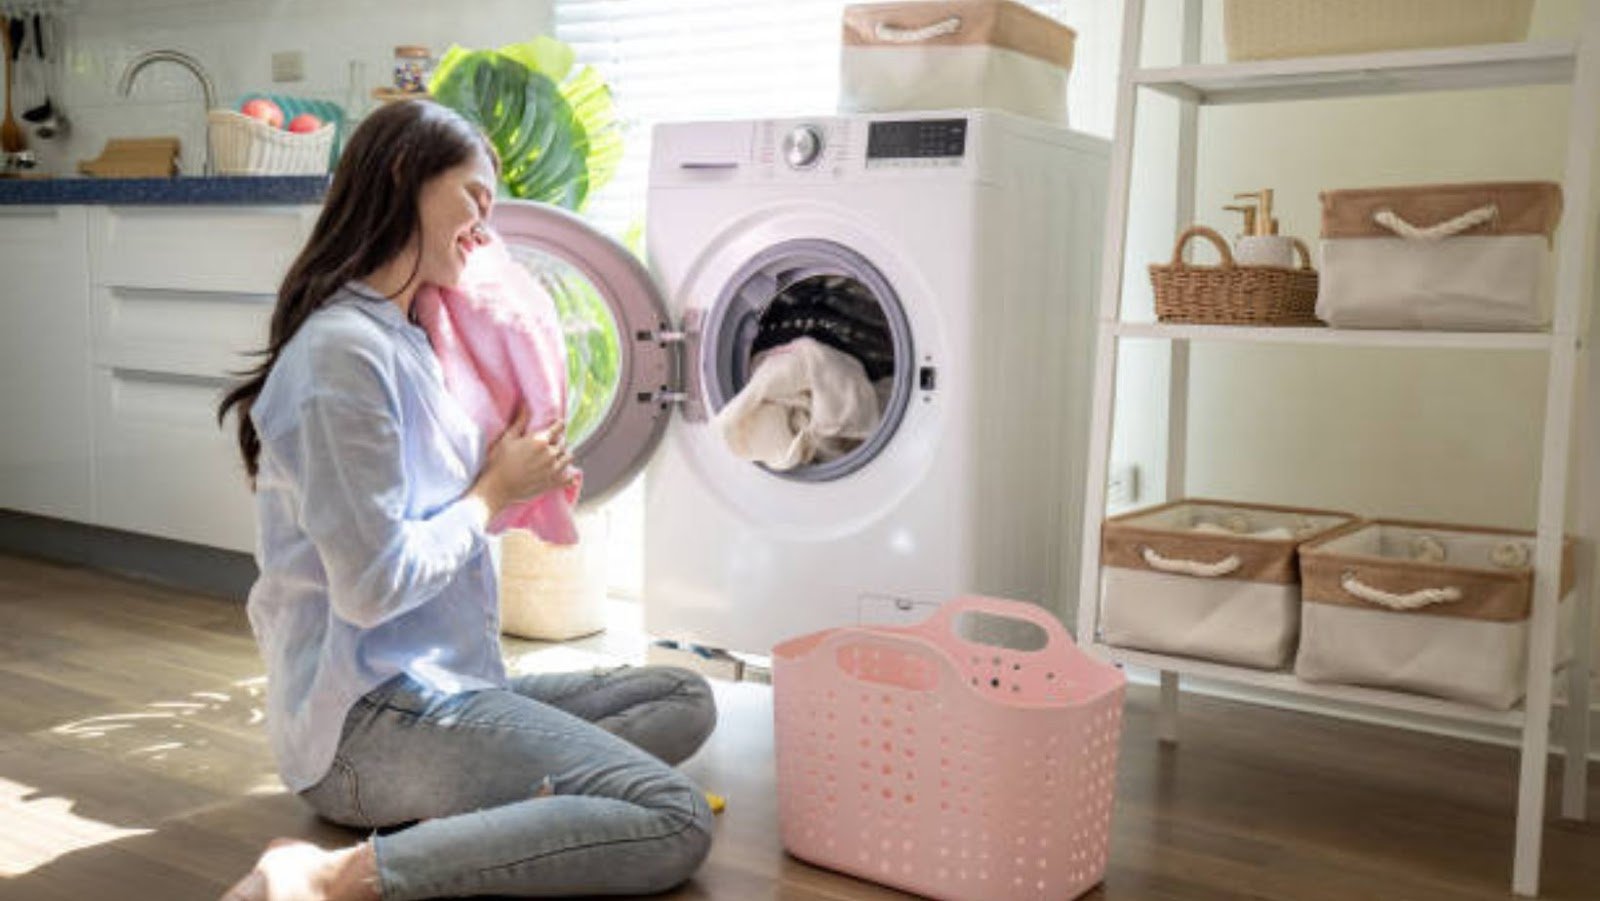 WHAT YOU SHOULD KNOW ABOUT YOUR WASHING MACHINE TO PROTECT THE ENVIRONMENT